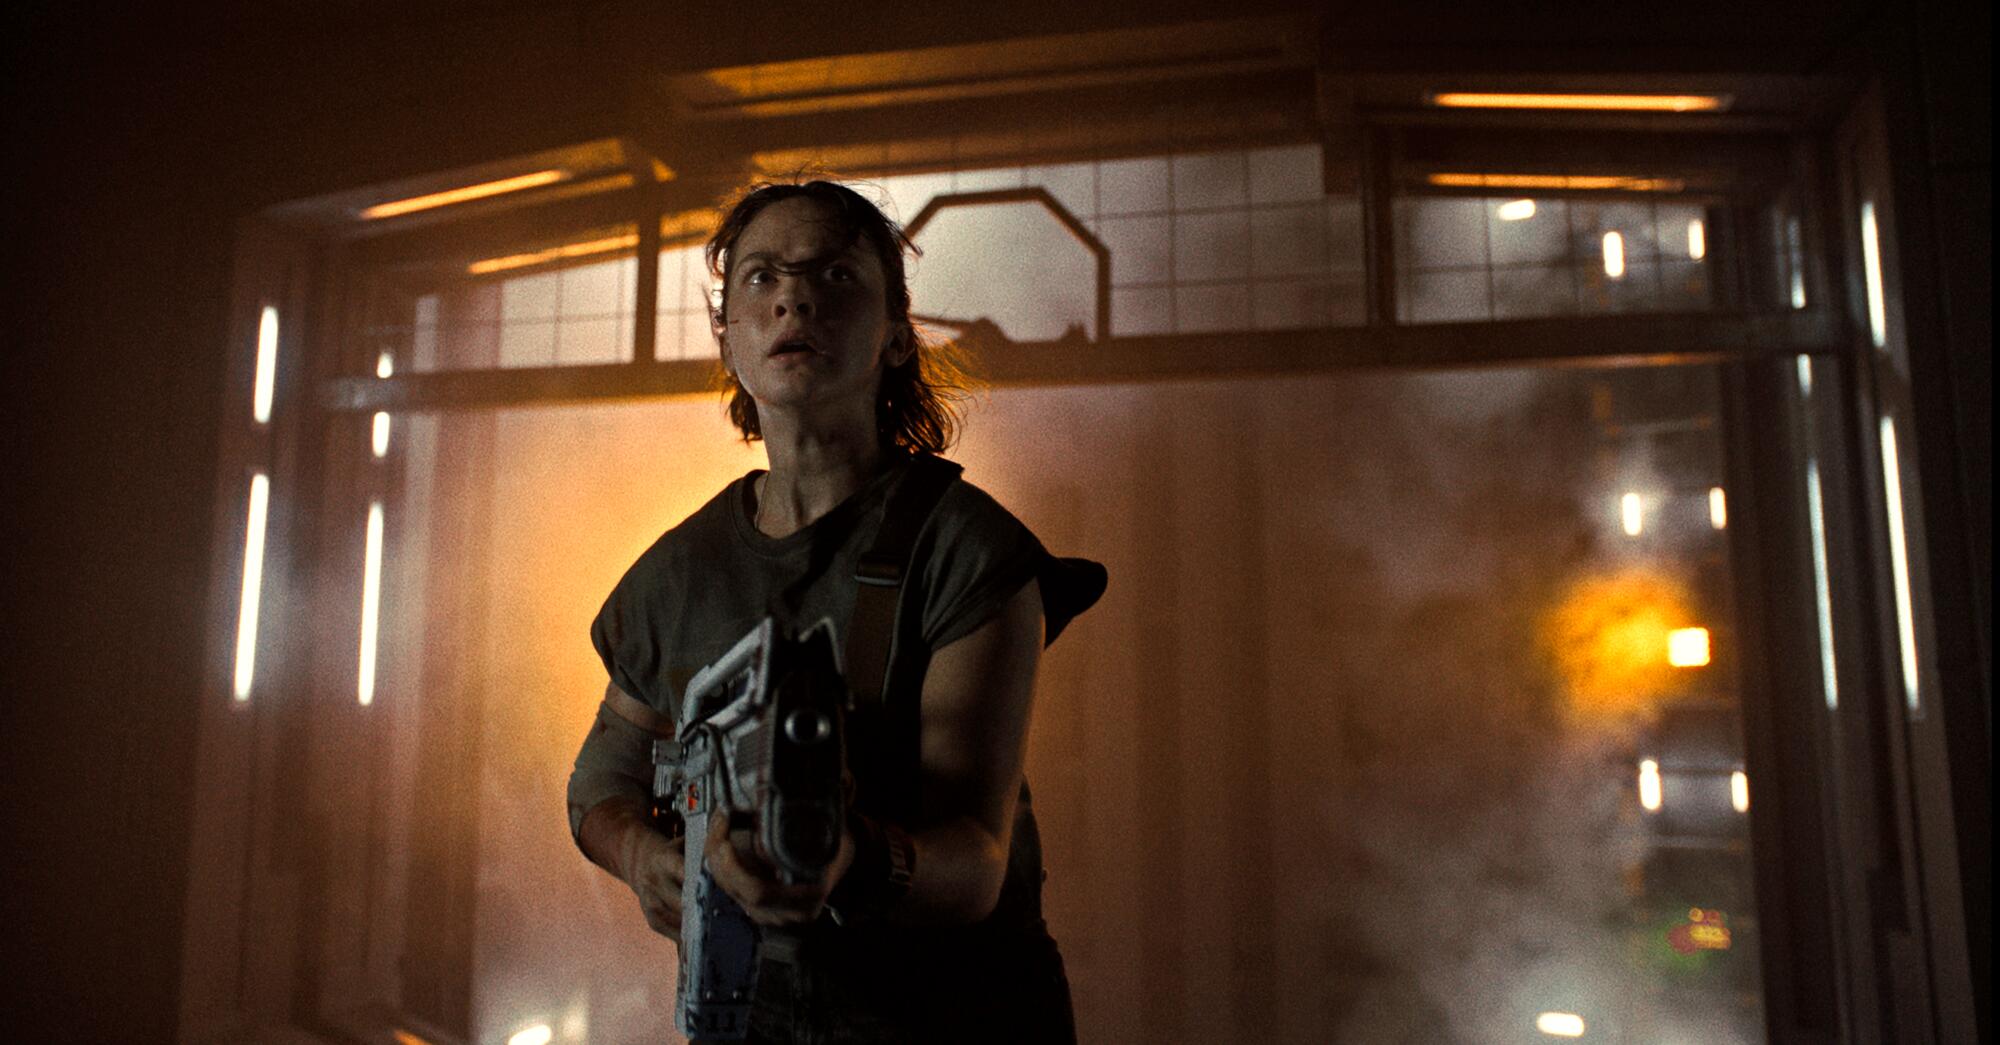 A woman patrols a spaceship with a weapon.